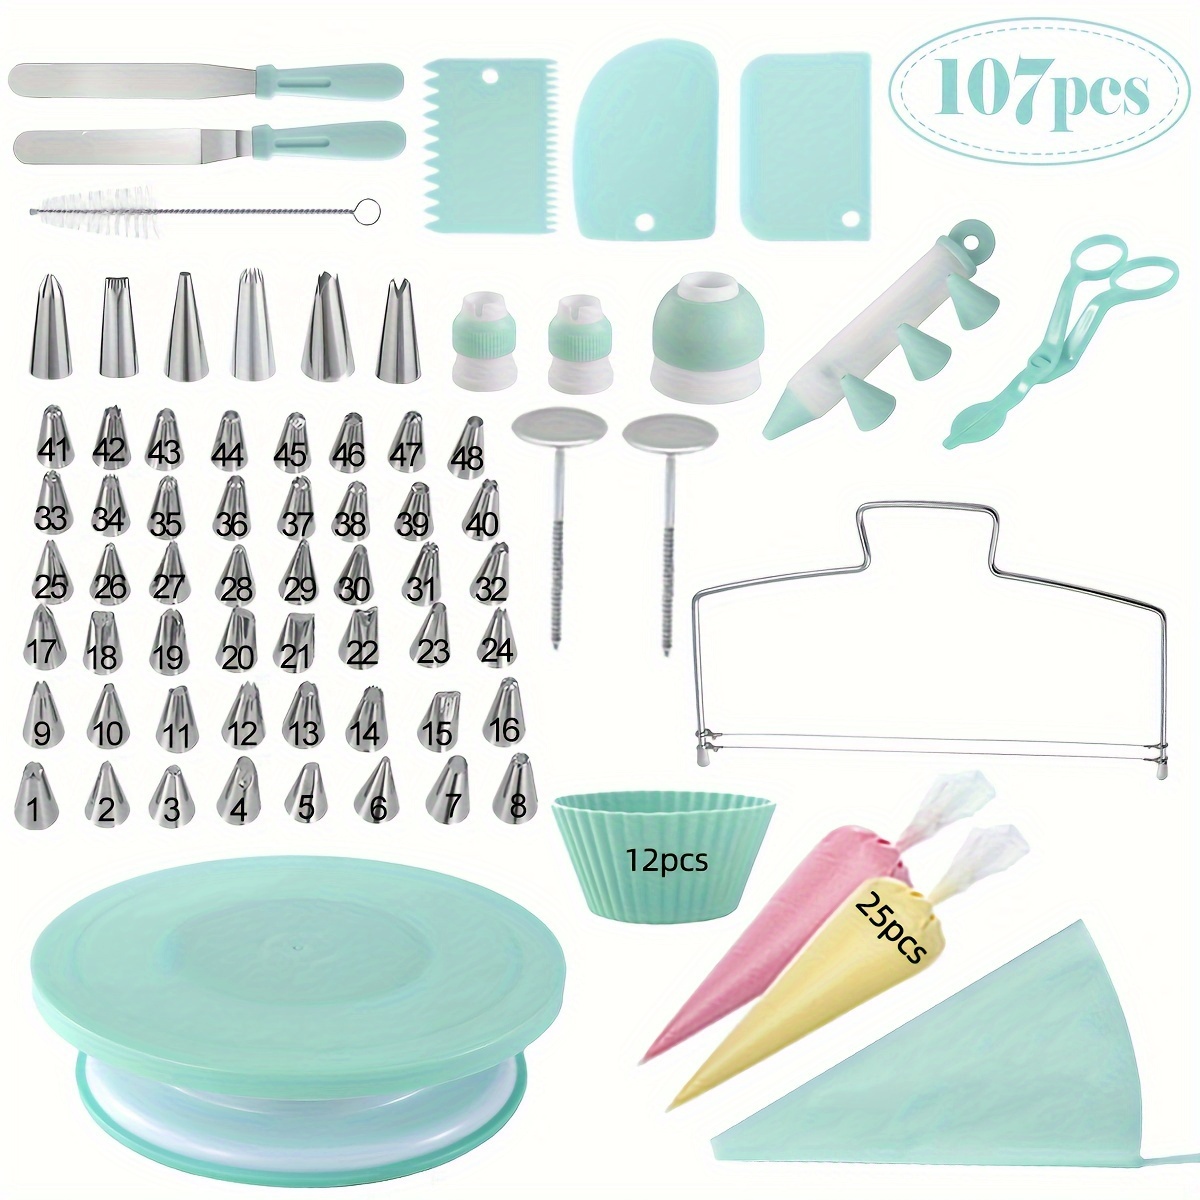 Cake Decorating Kit,132Pcs Cake Making Tools with Cake Turntable  Stand,Icing Piping Nozzles,Russian Tulip Tips,Baking Decorations Supplies  Set